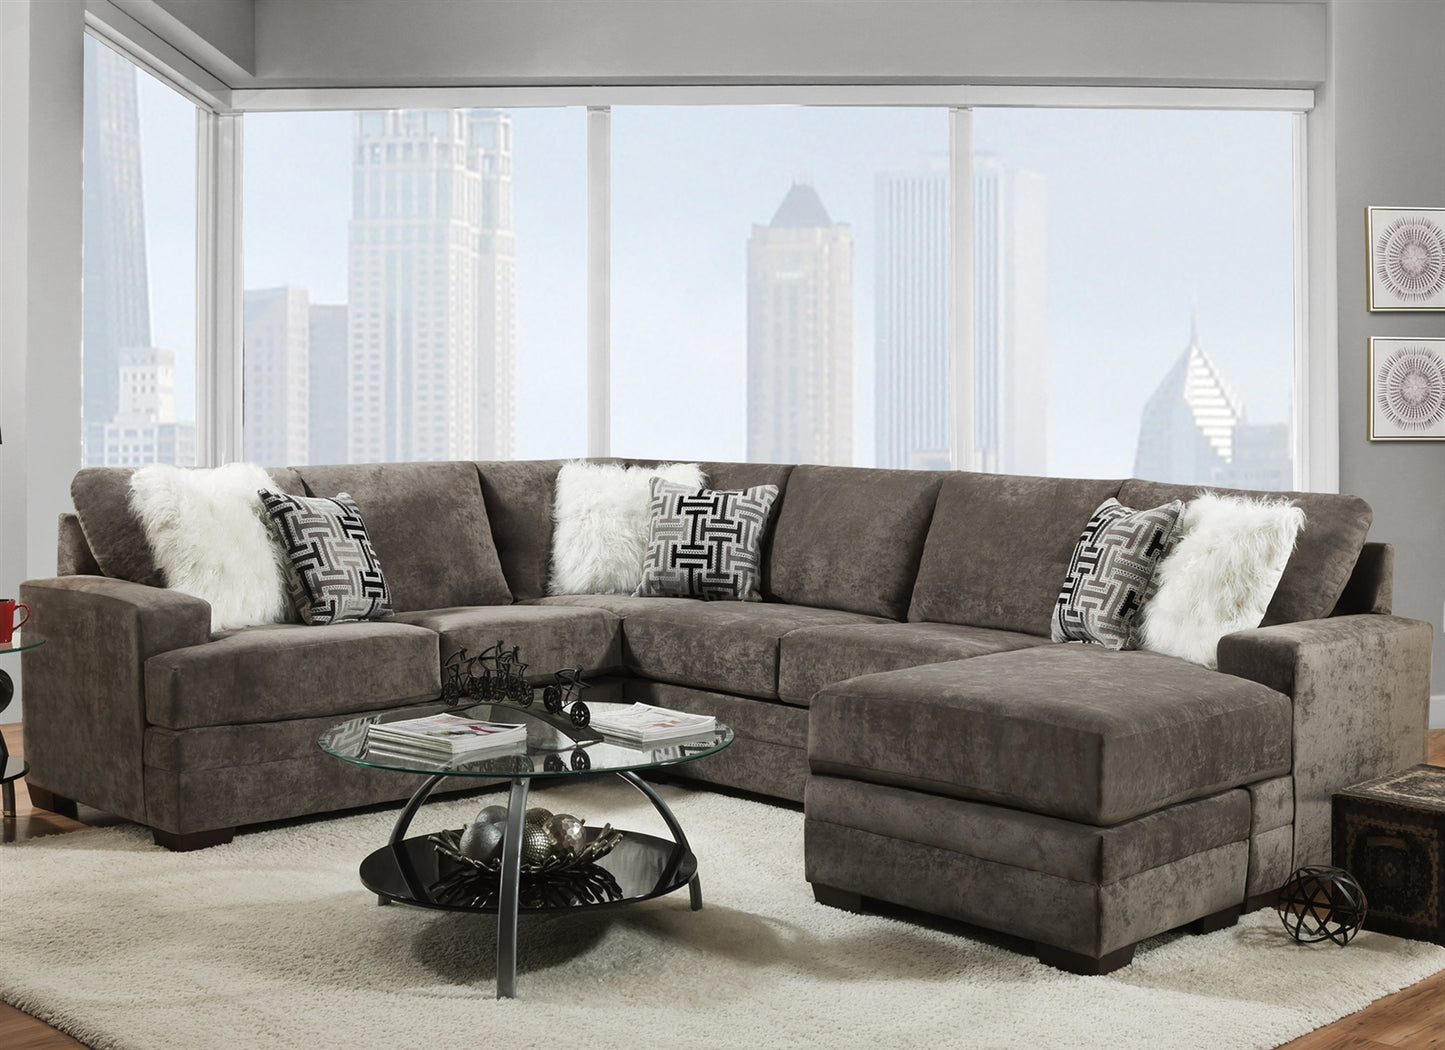 Hearth 2760 Cloud Charcoal Sectional - Delta Furniture